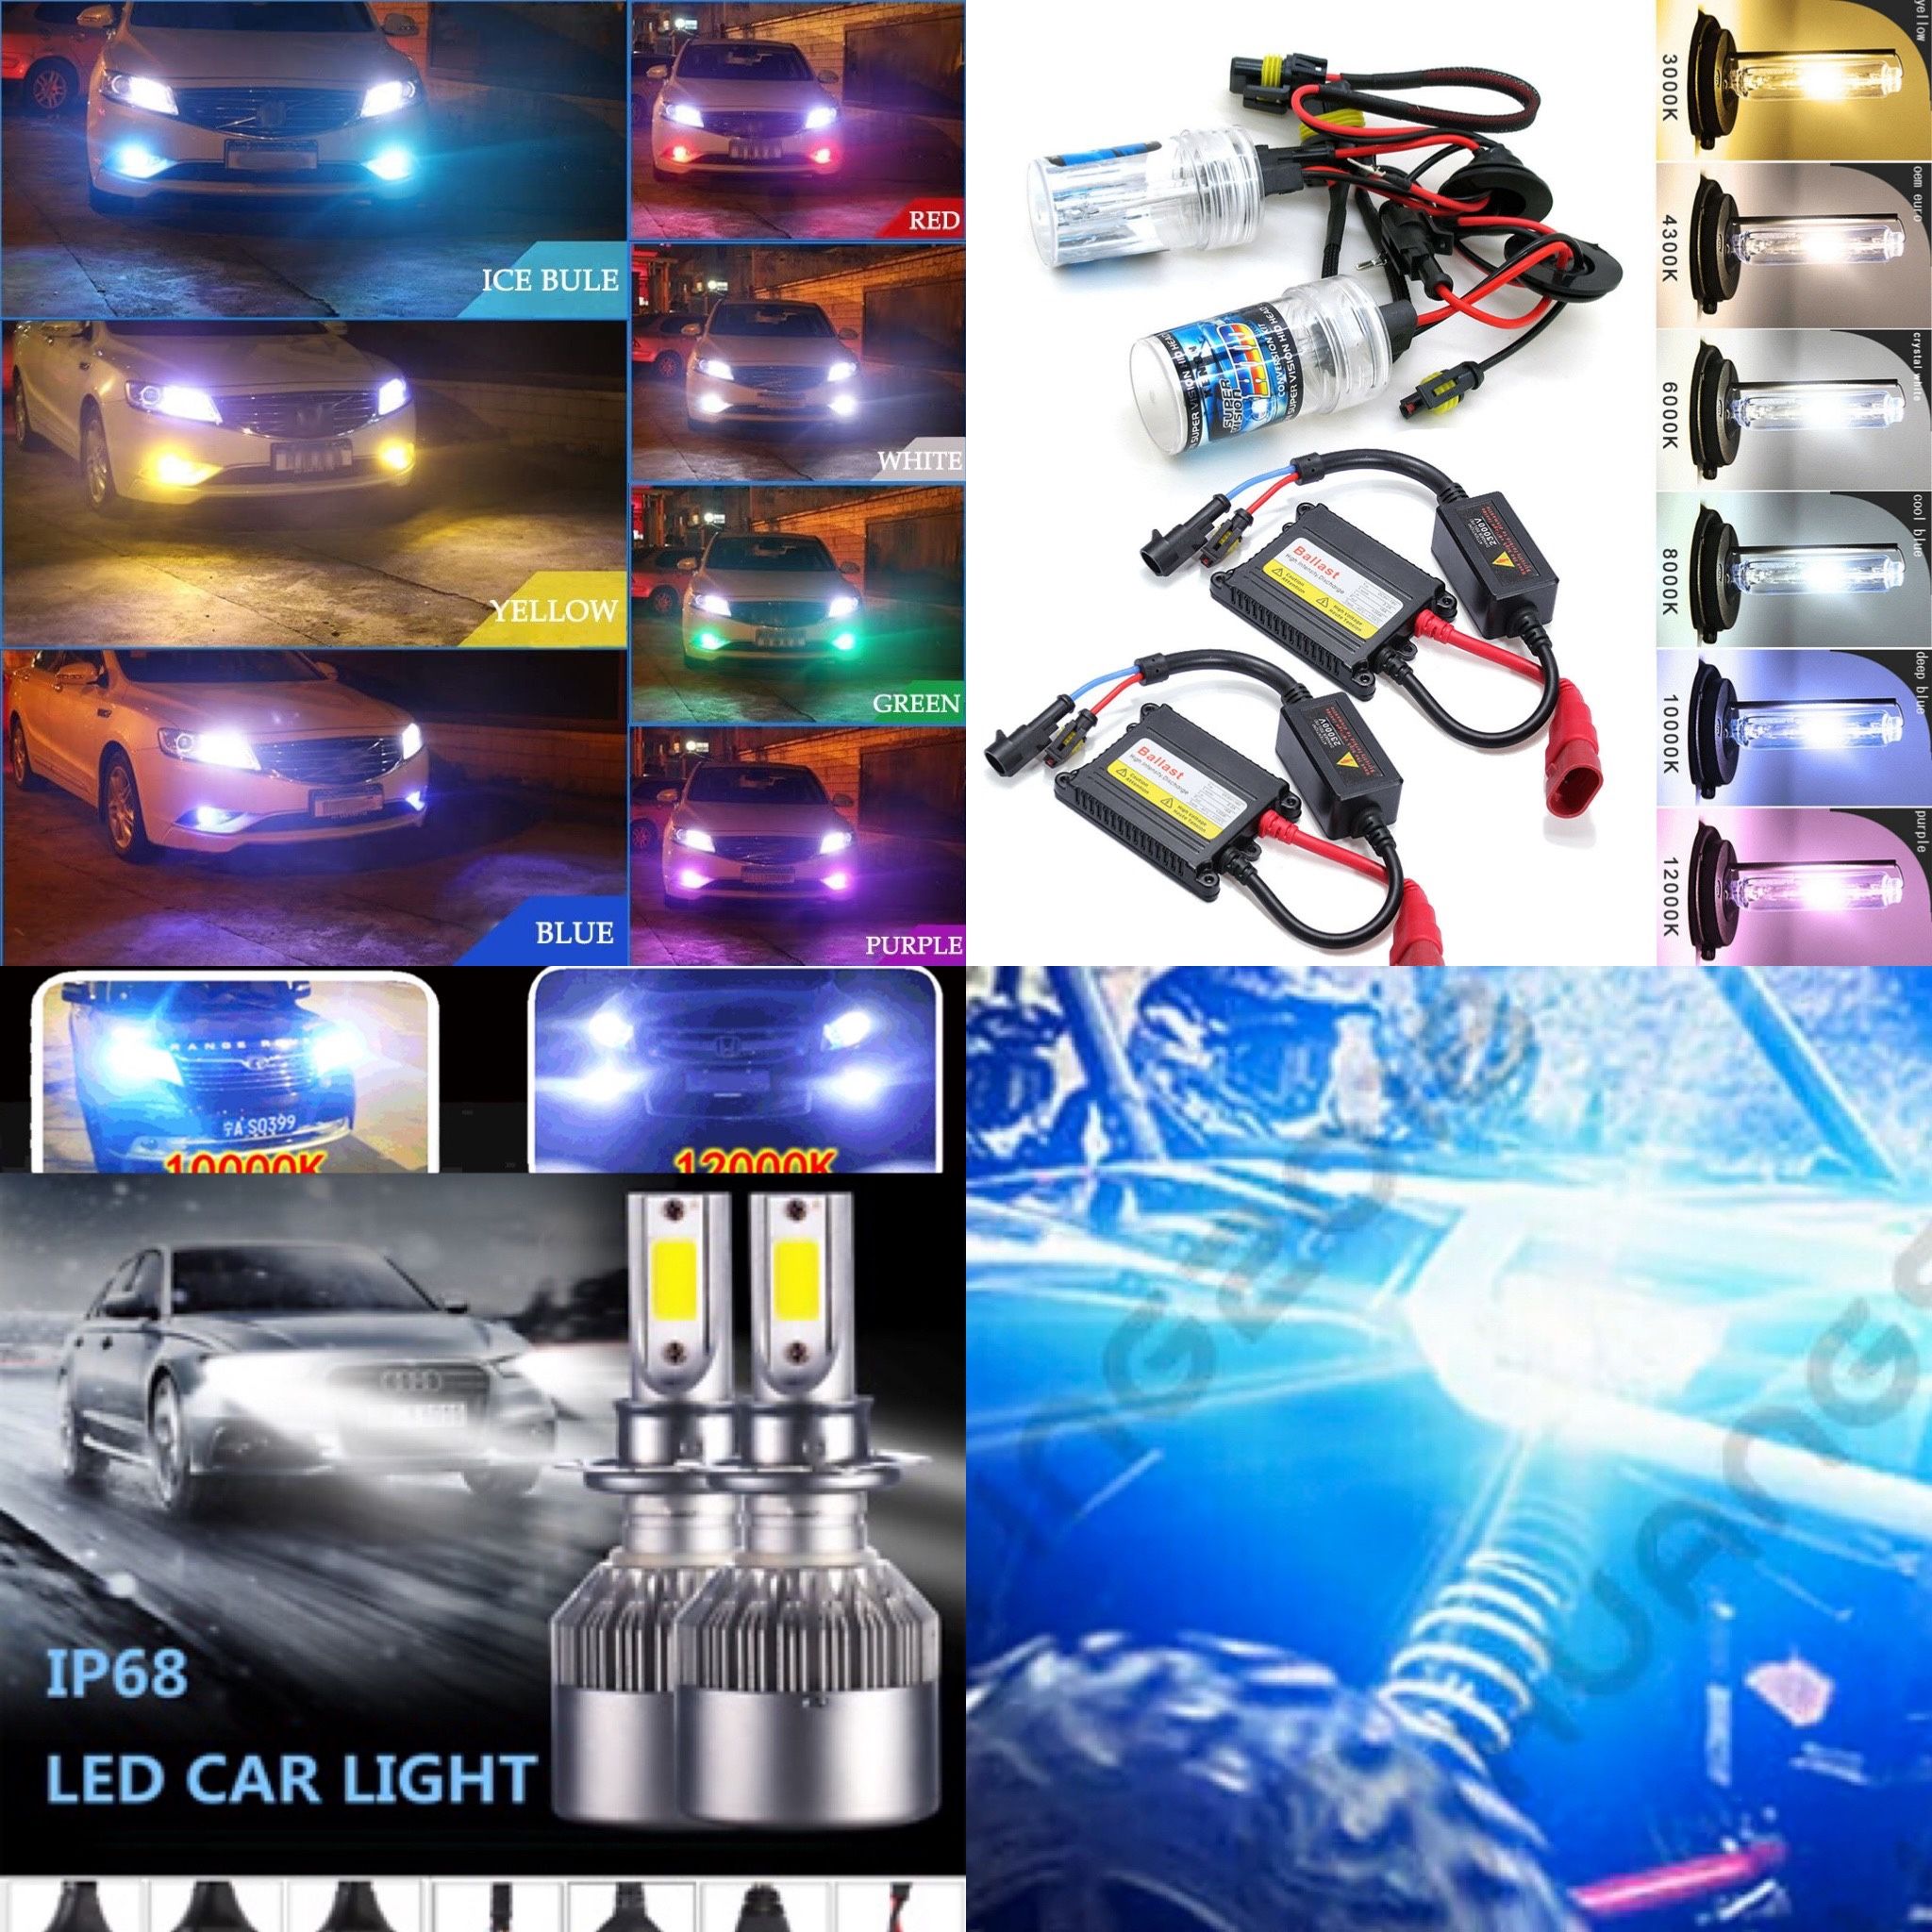 Led Headlight Bulbs - Hid Lights Kit - Any Color Blue White Purple Any Bulb - Lincoln Town Car To Chevy Silverado To Civic Colorado Truck Car Bike H11